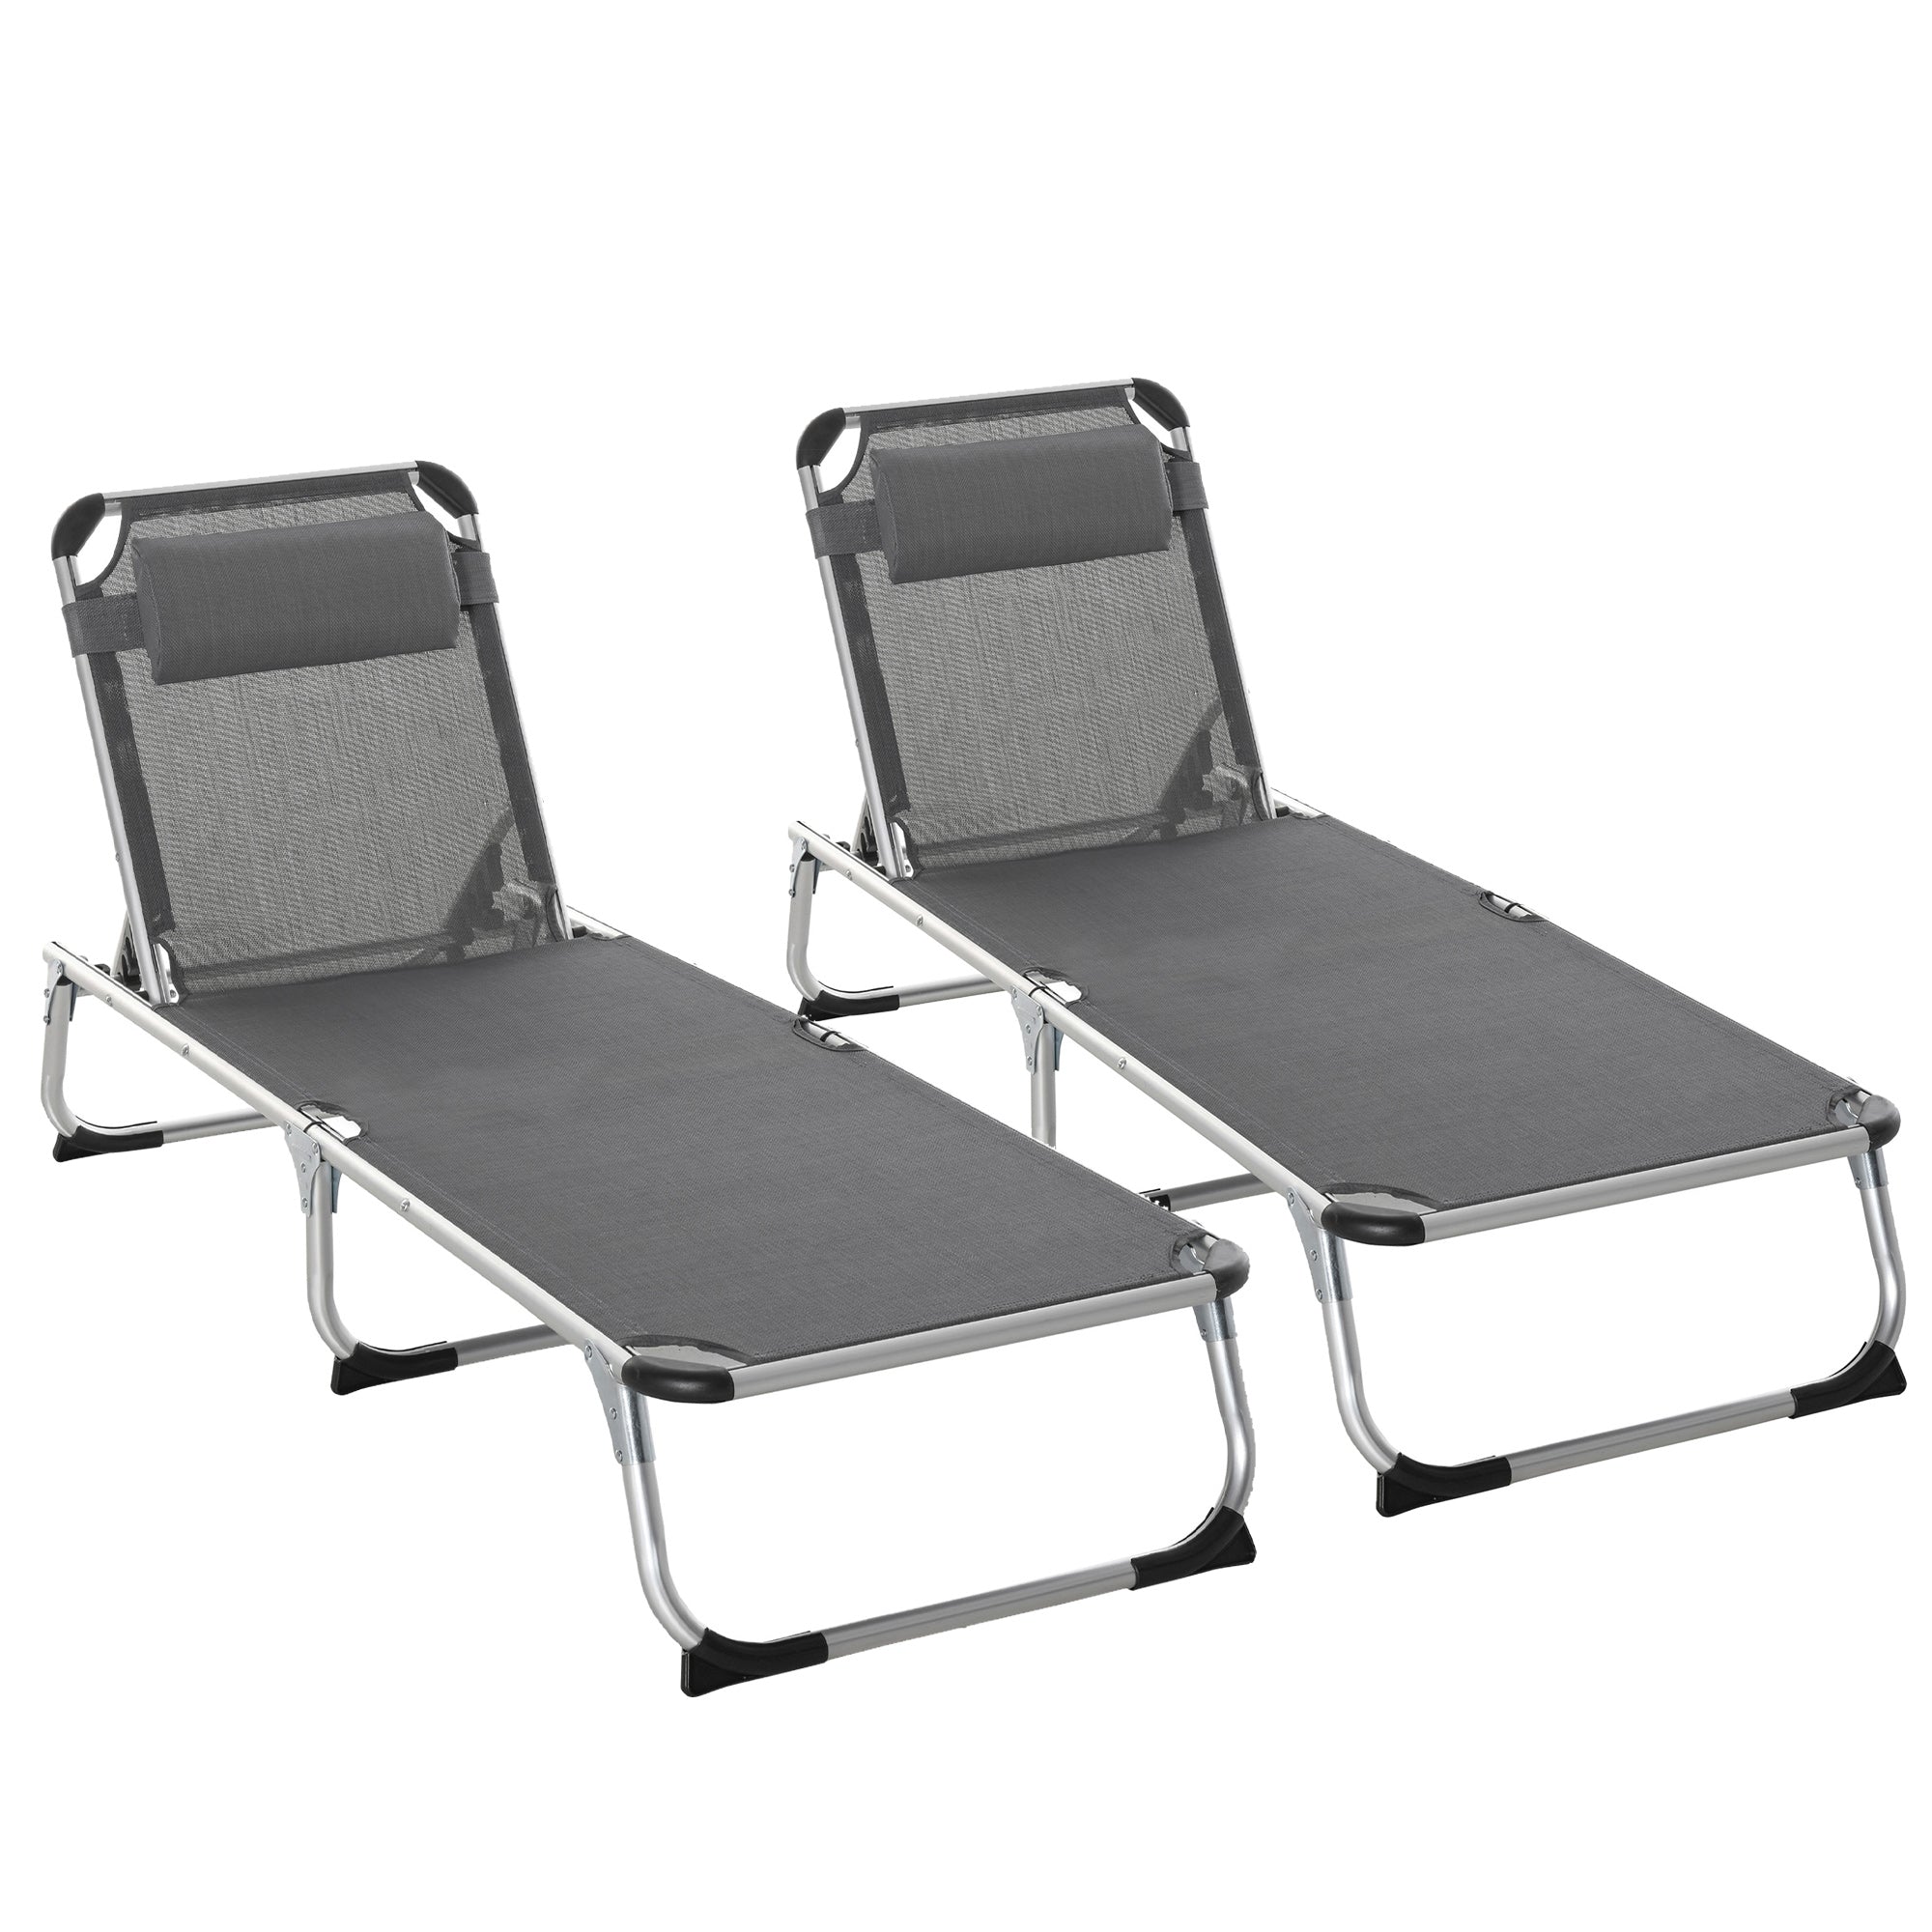 2 Pieces Foldable Sun Lounger with Pillow, 5-Level Adjustable Reclining Lounge Chair, Aluminium Frame Camping Bed Cot, Grey-0